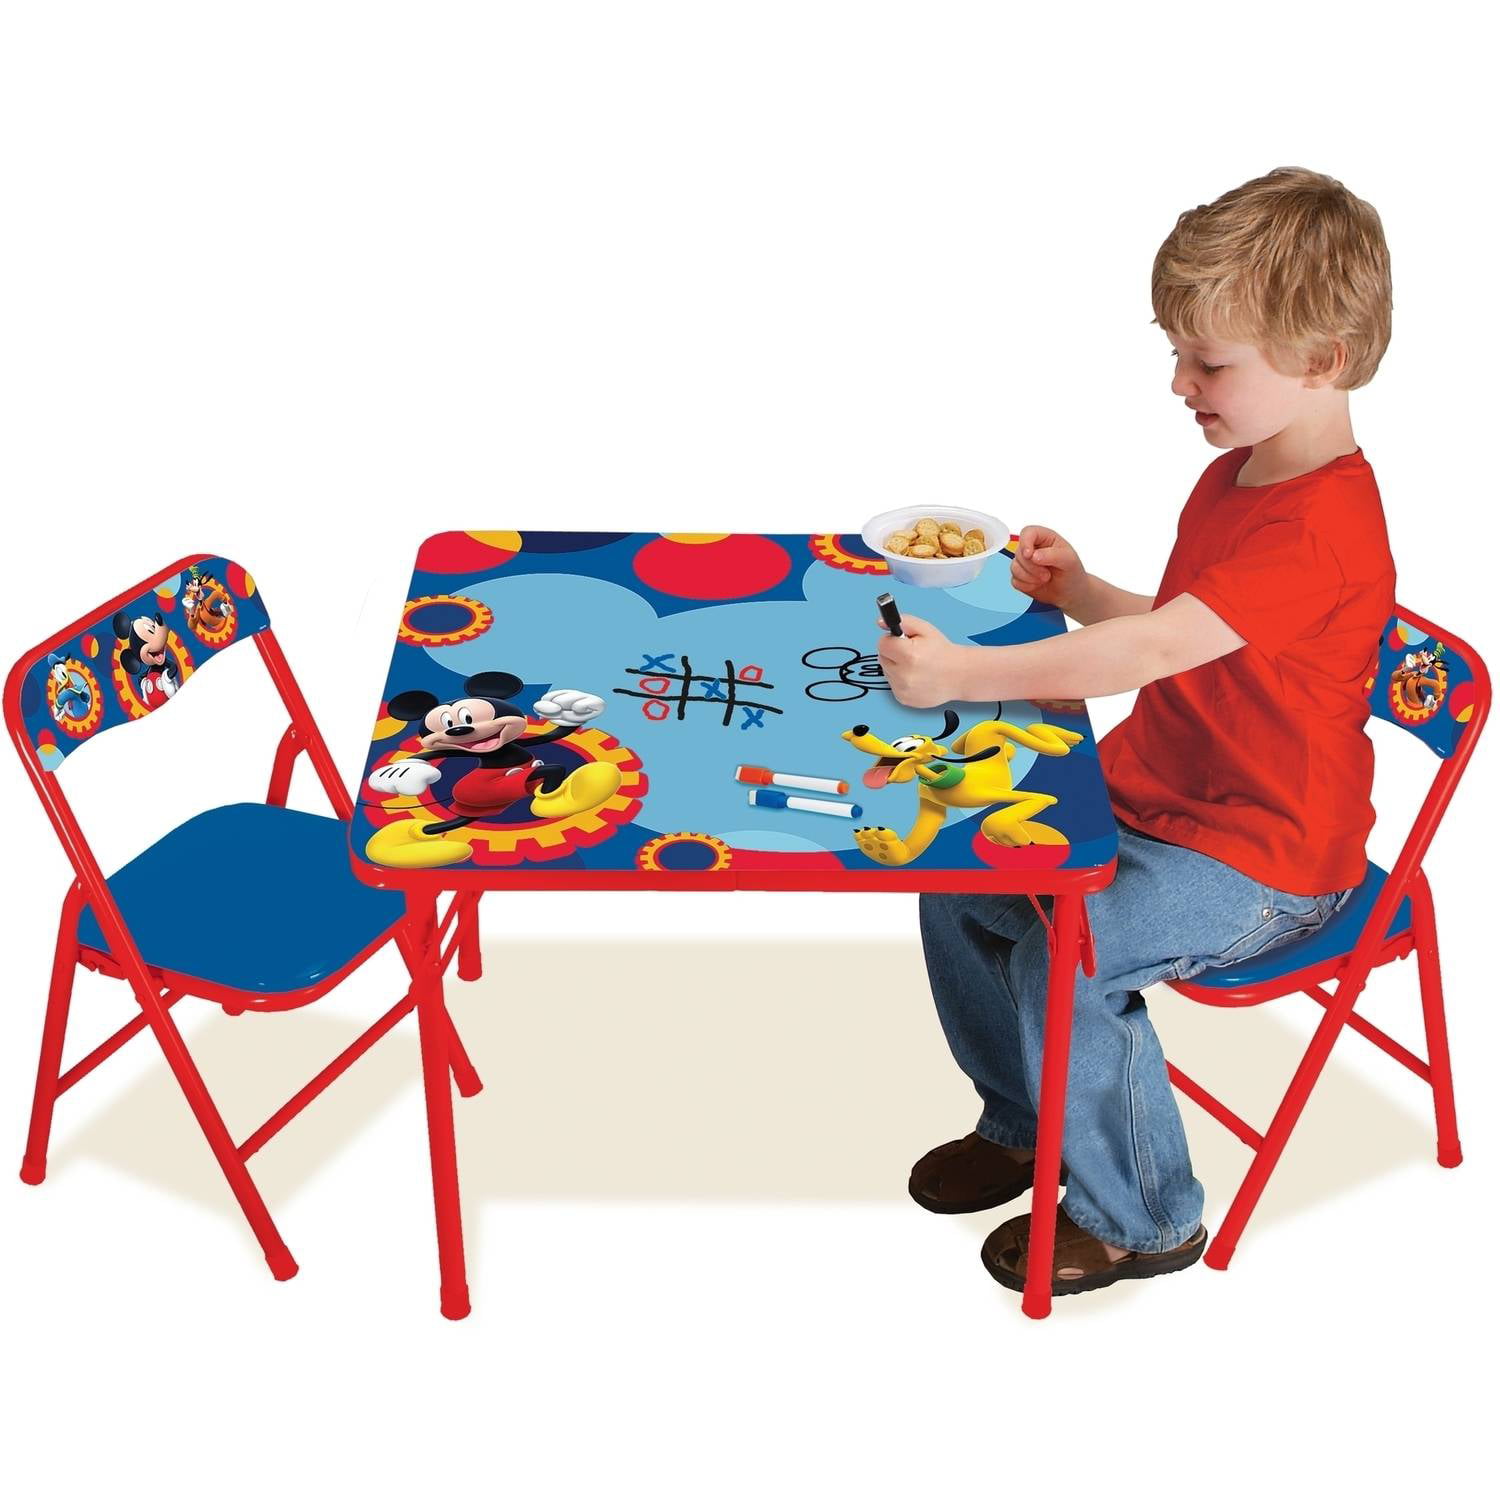 Folding Childrens Table /& Chair Set Mickey Mouse Activity Table Sets Includes 2 Kid Chairs with Non Skid Rubber Feet /& Padded Seats Sturdy Metal Construction